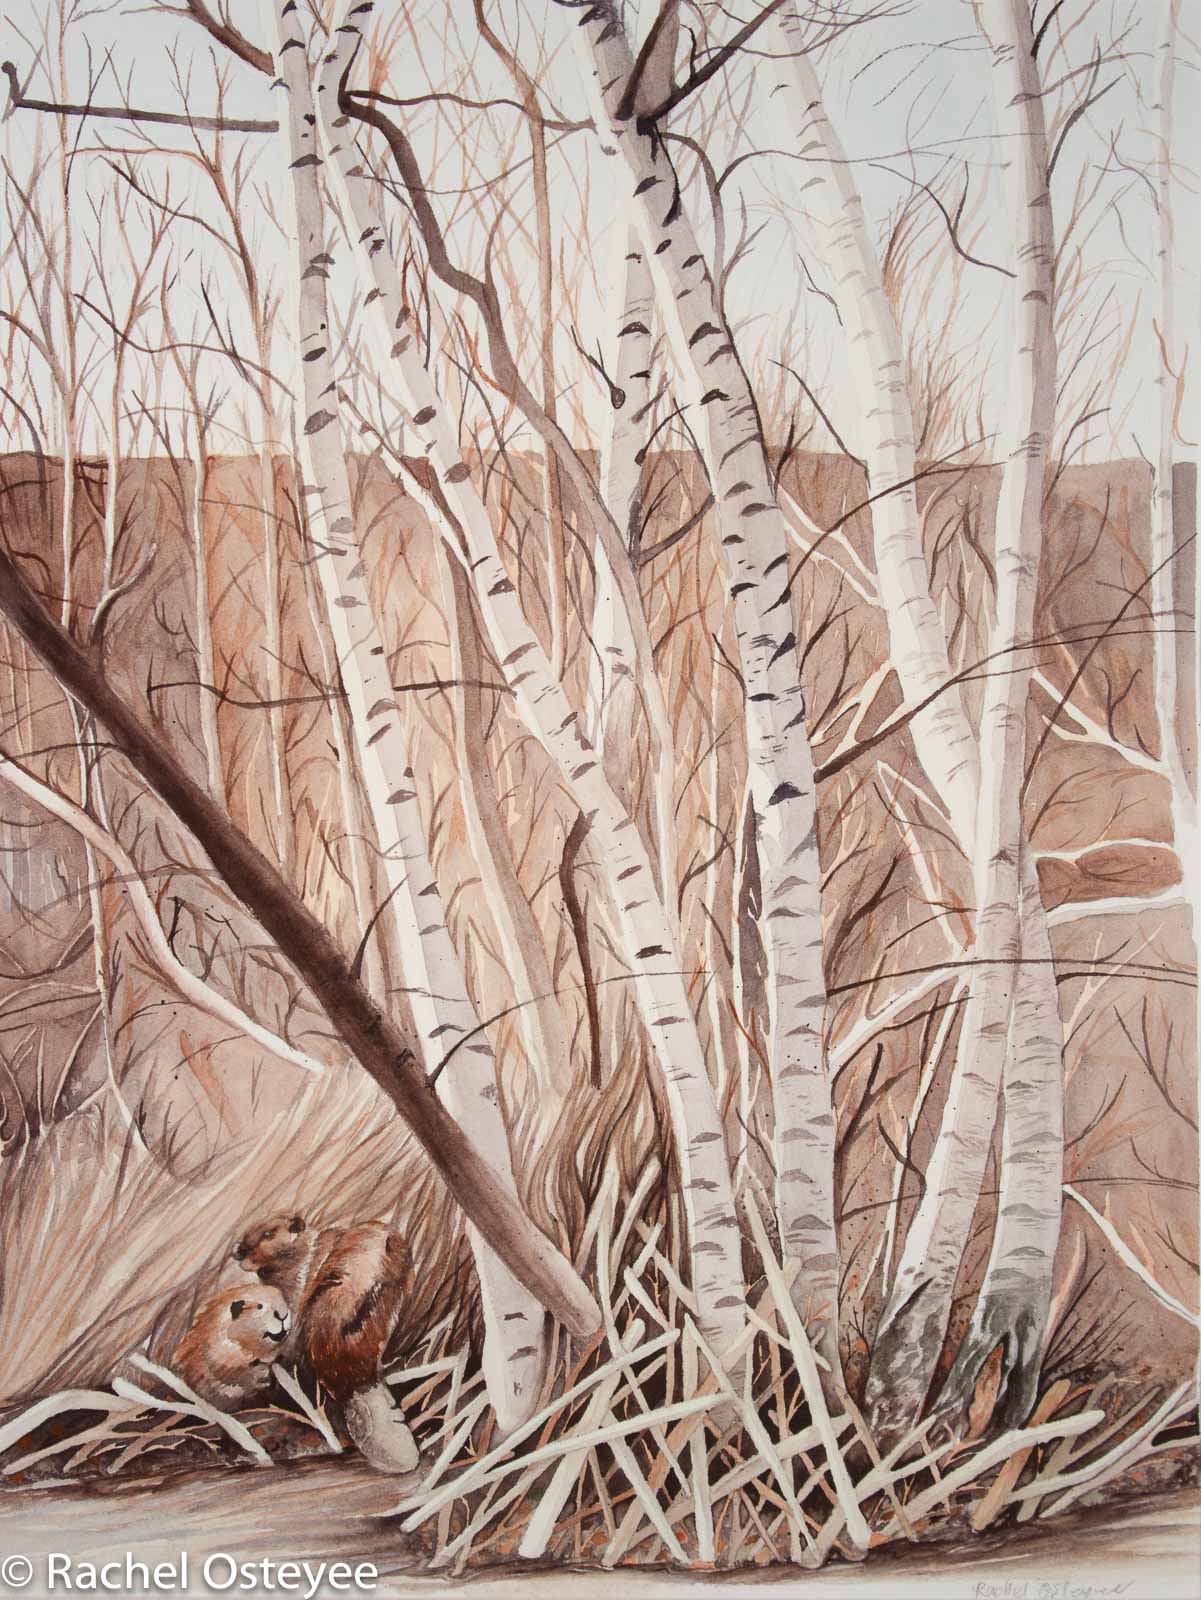 Land of the Silver Birch (13" x 17", Watercolor)